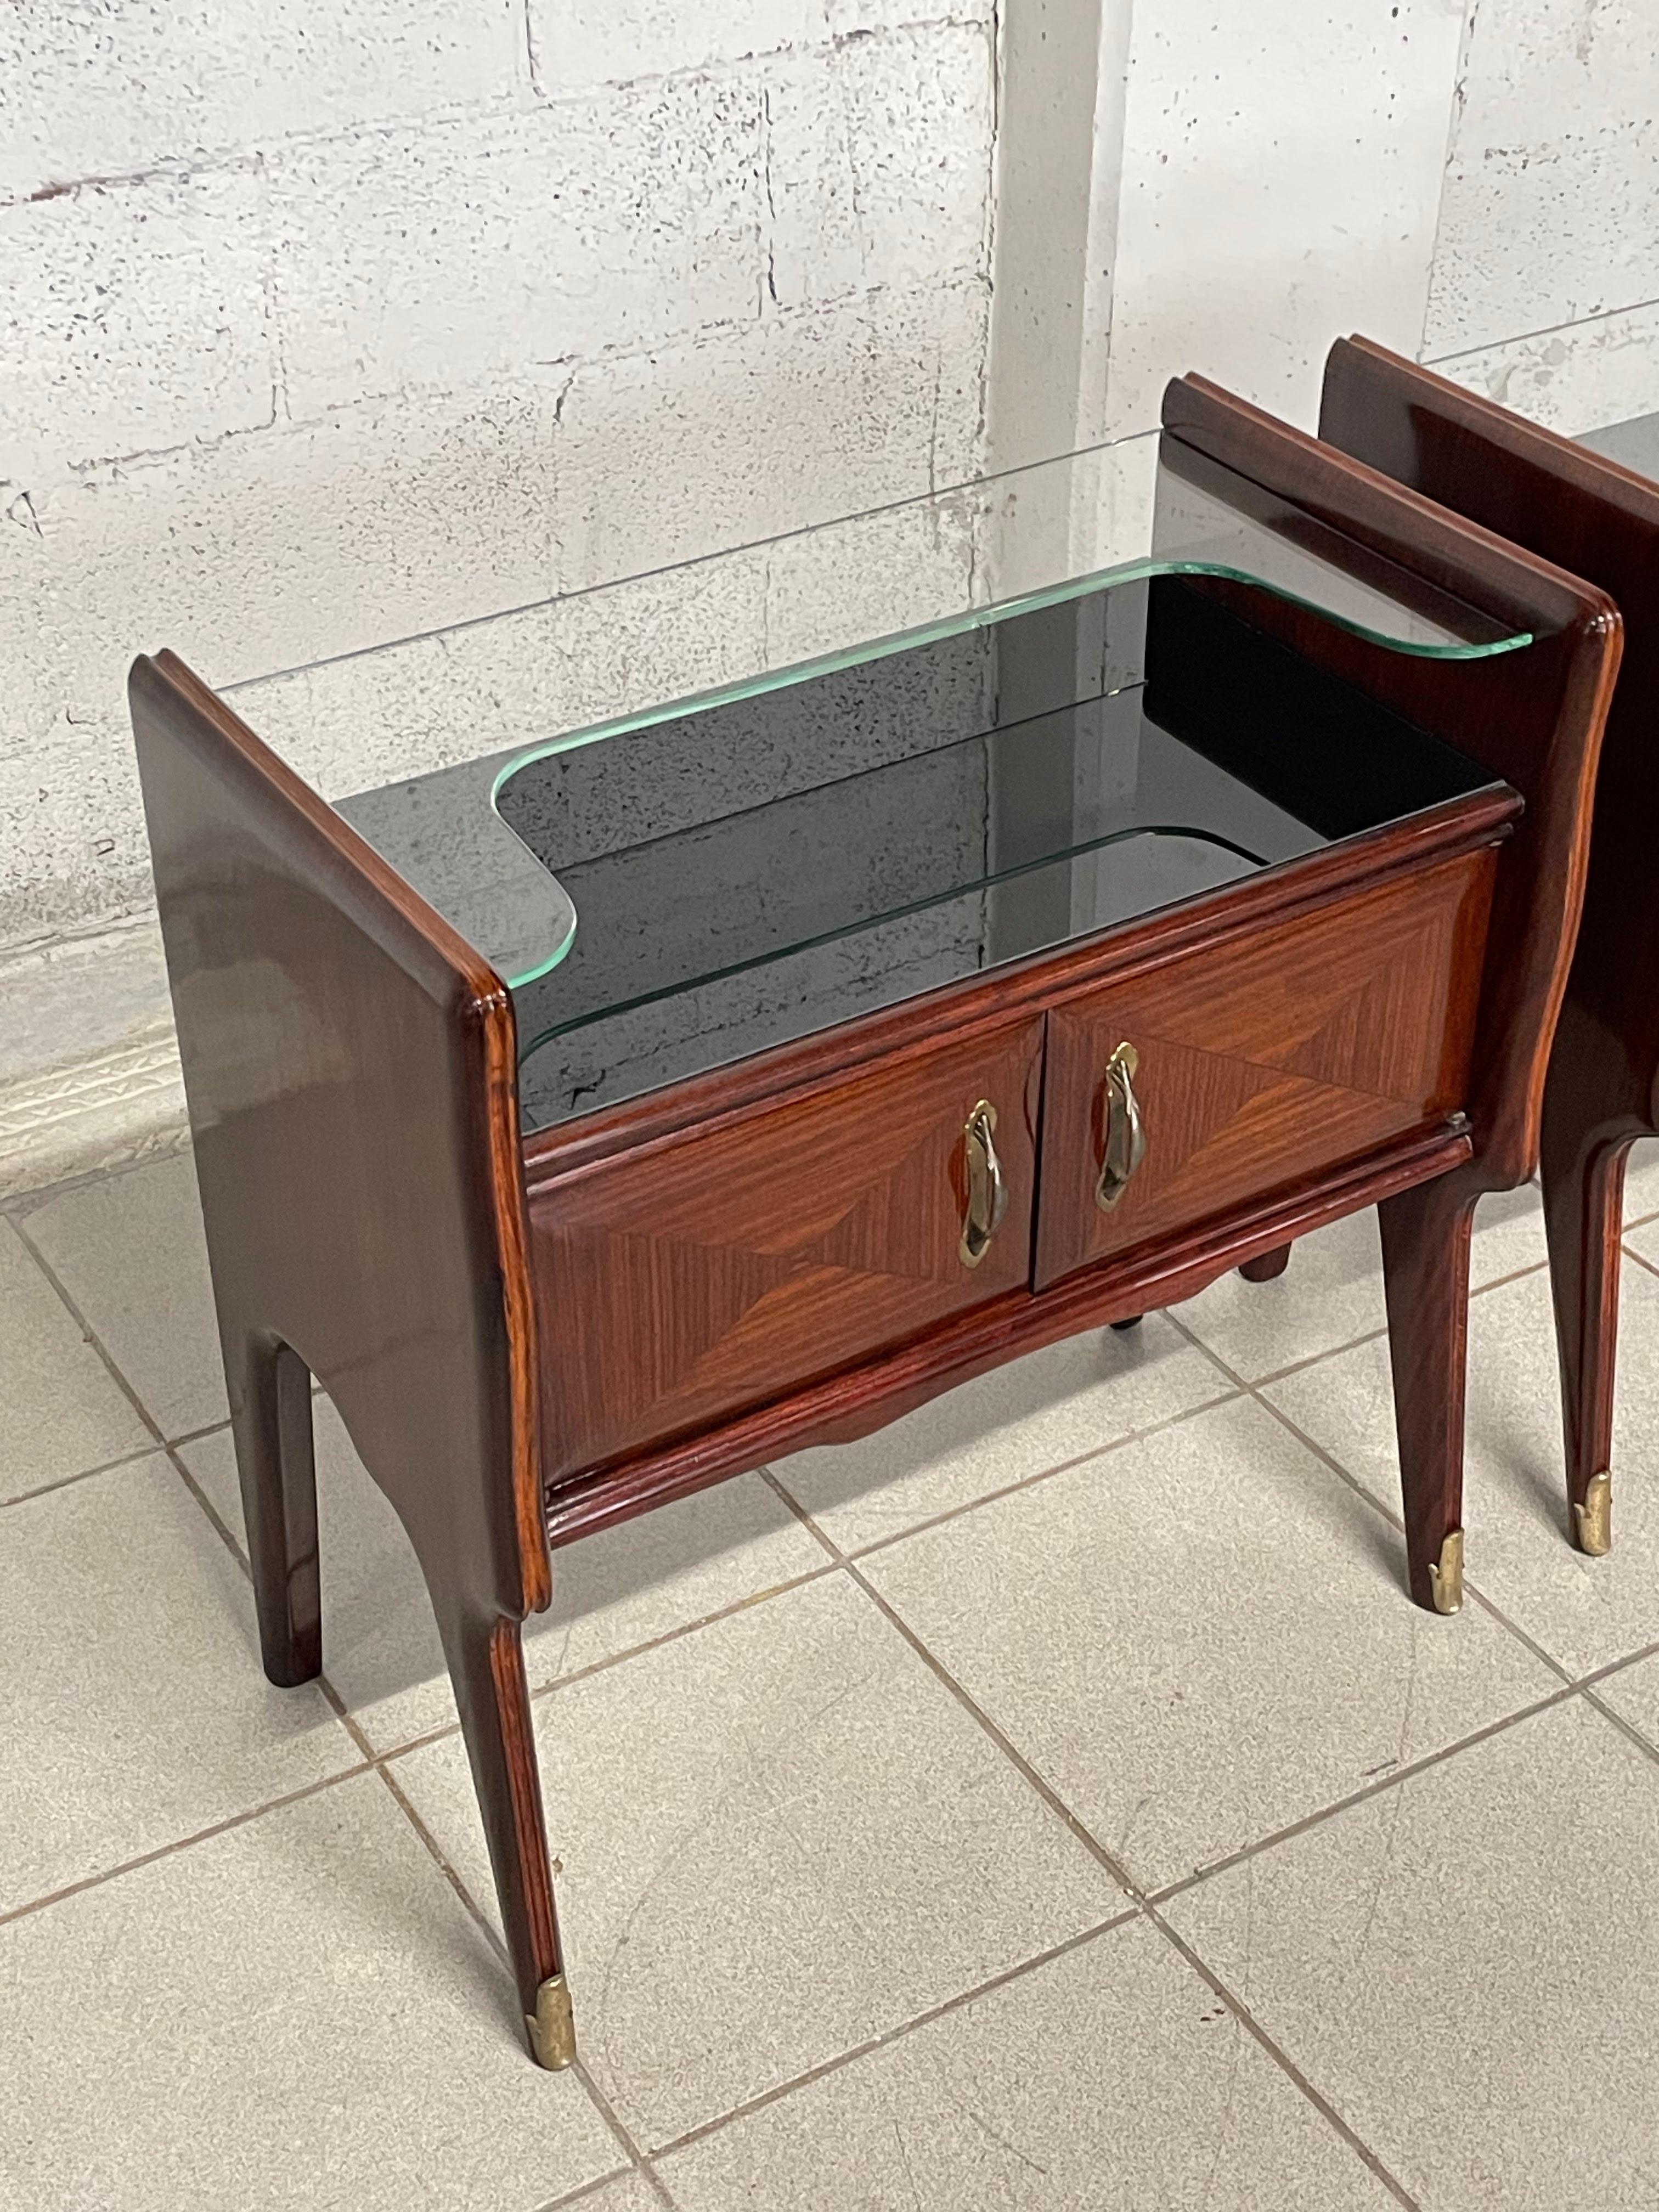 20th Century Pair of mahogany and glass bedside tables from the 1950s